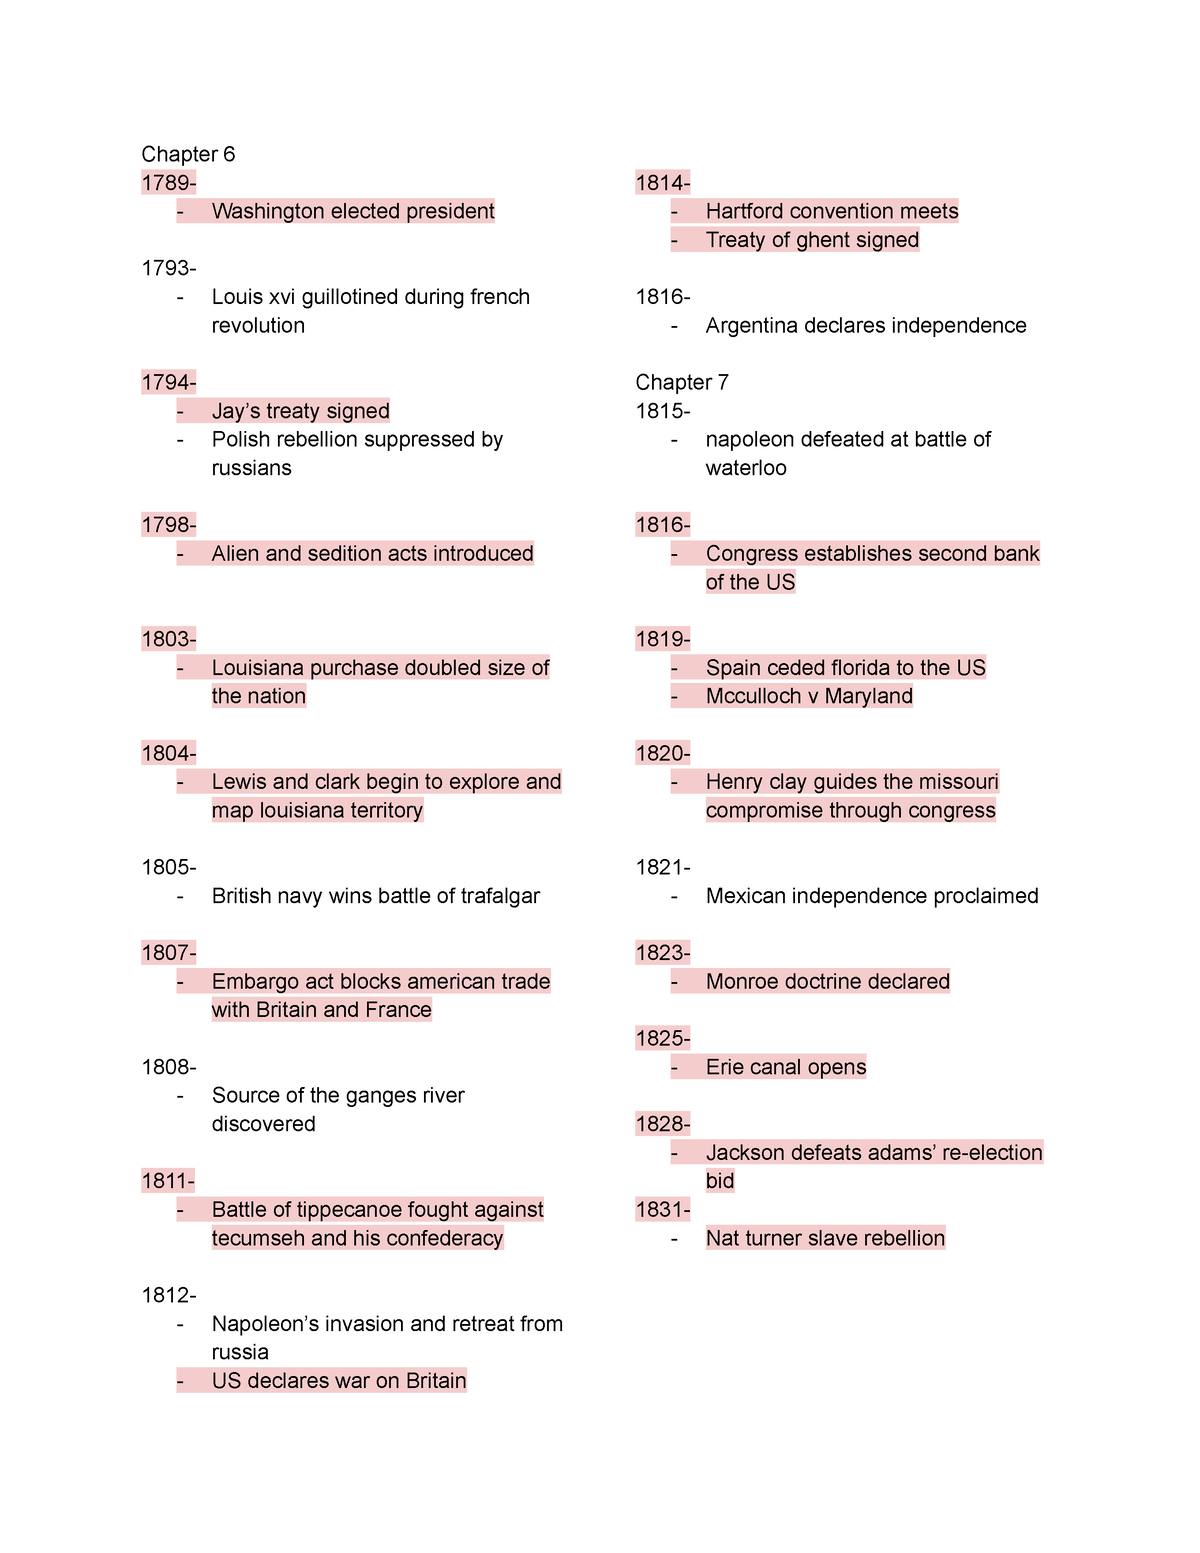 Chapter 6-11 - timeline of events form american vision textbook ...